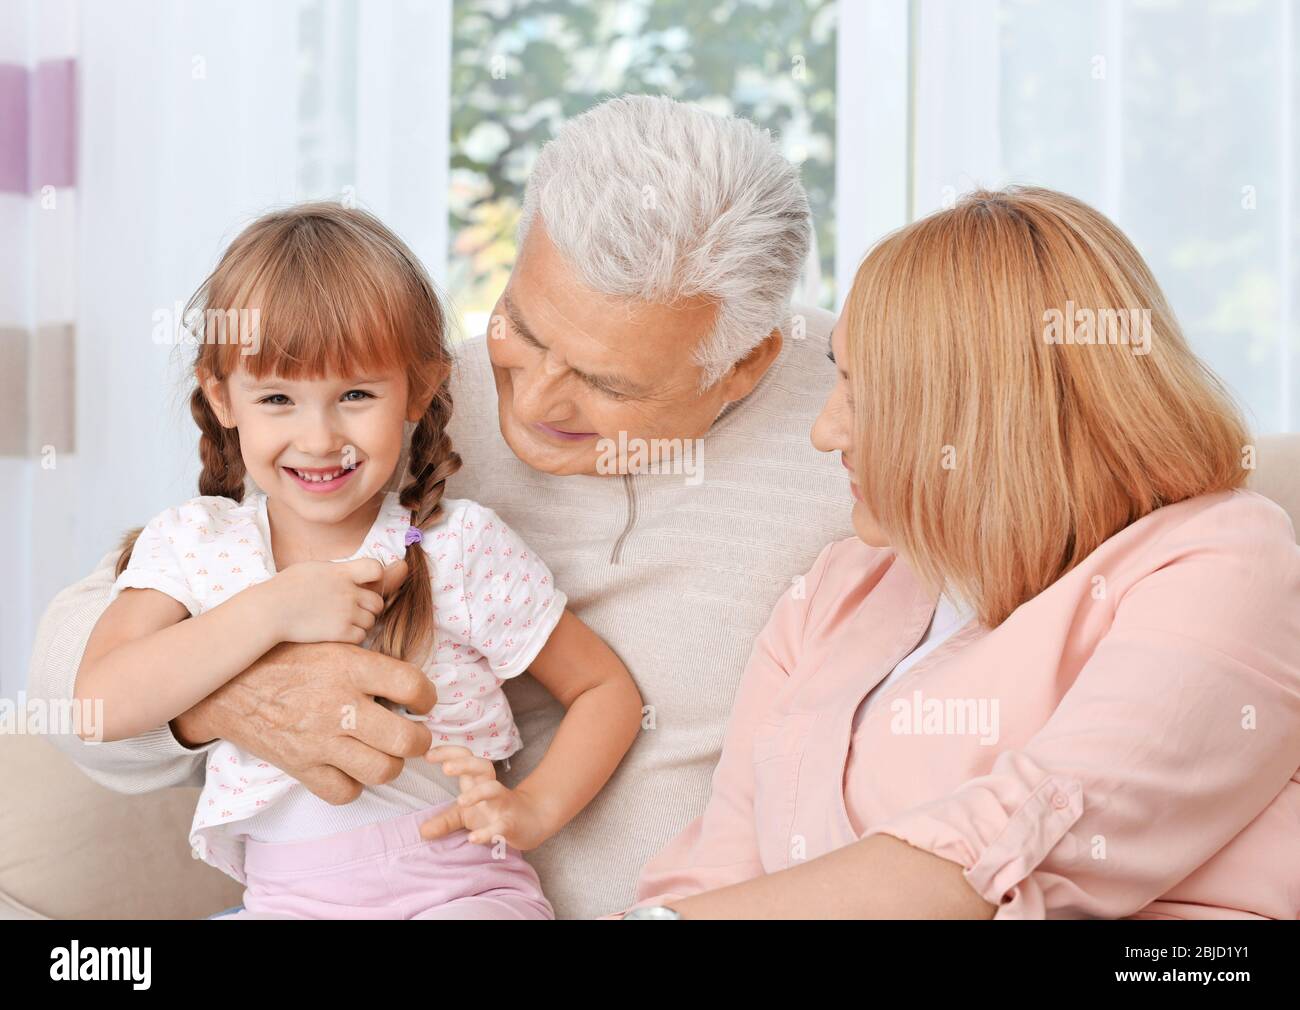 Grandparents with granddaughter on couch Stock Photo